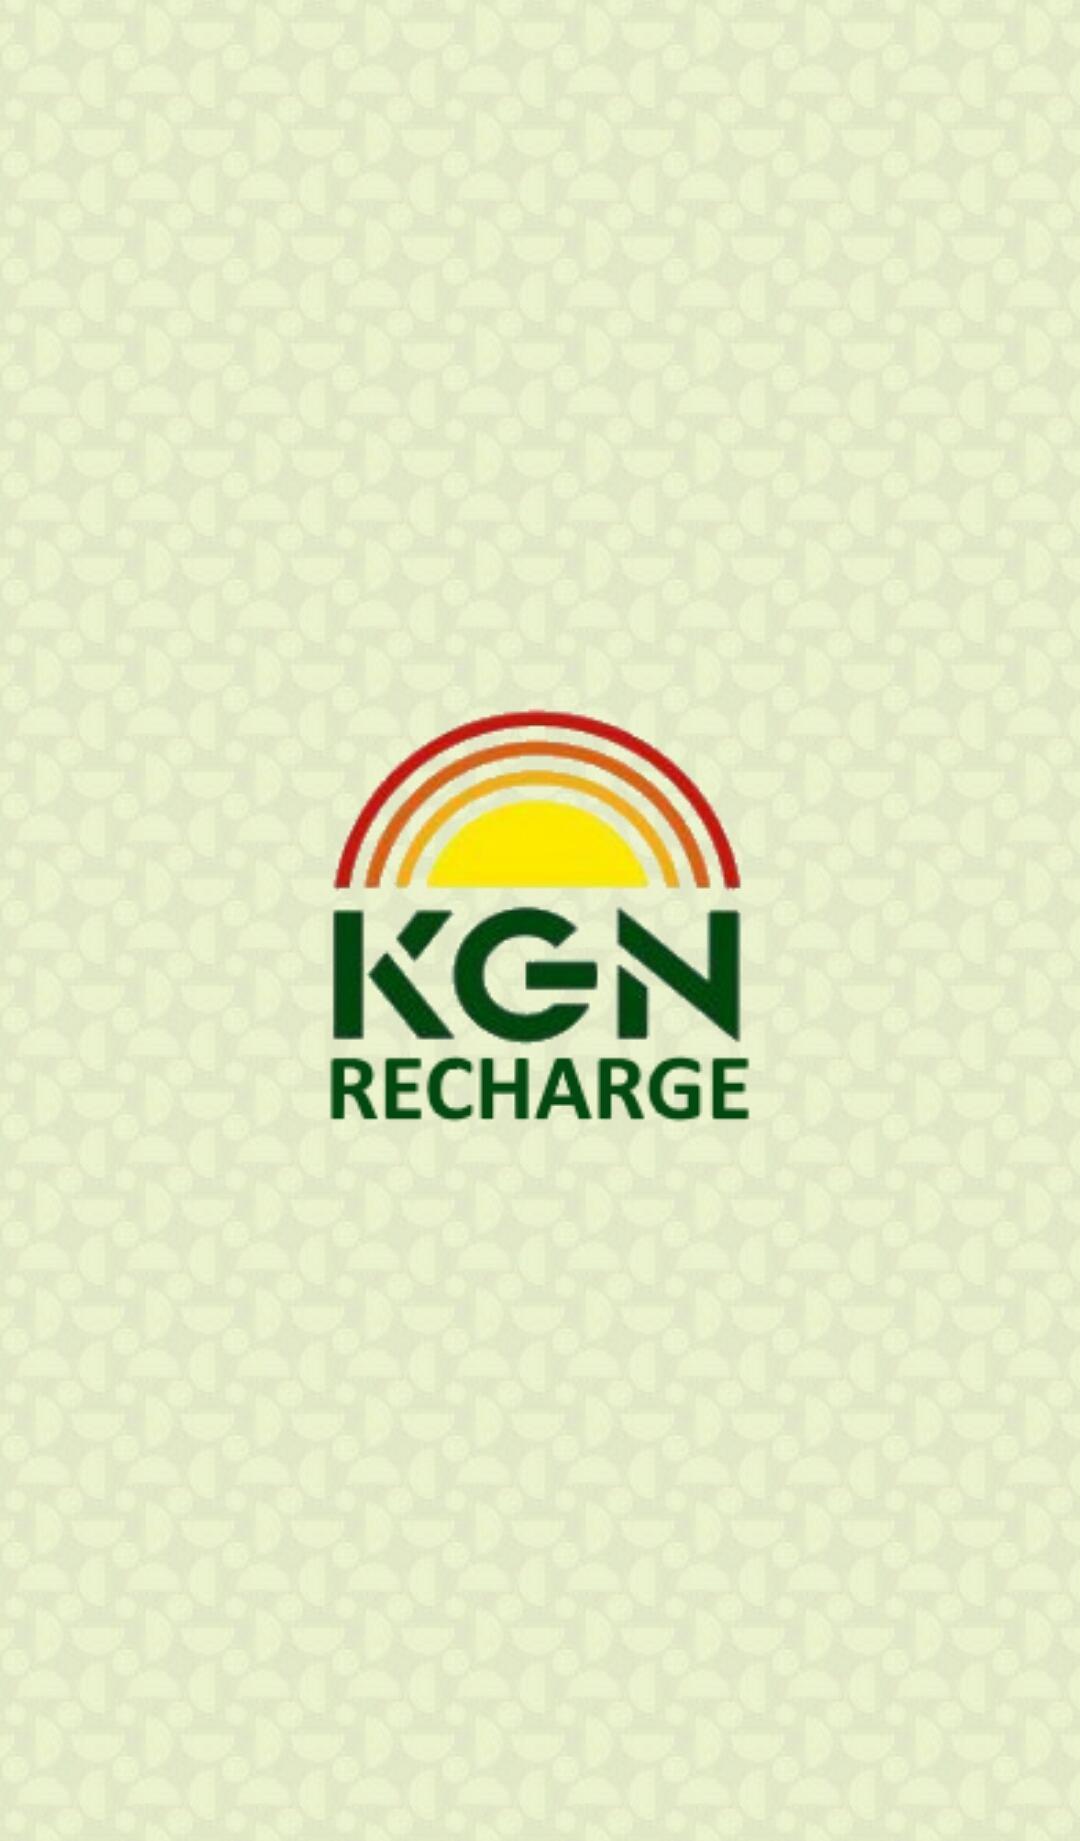 Kgn Recharge For Android Apk Download